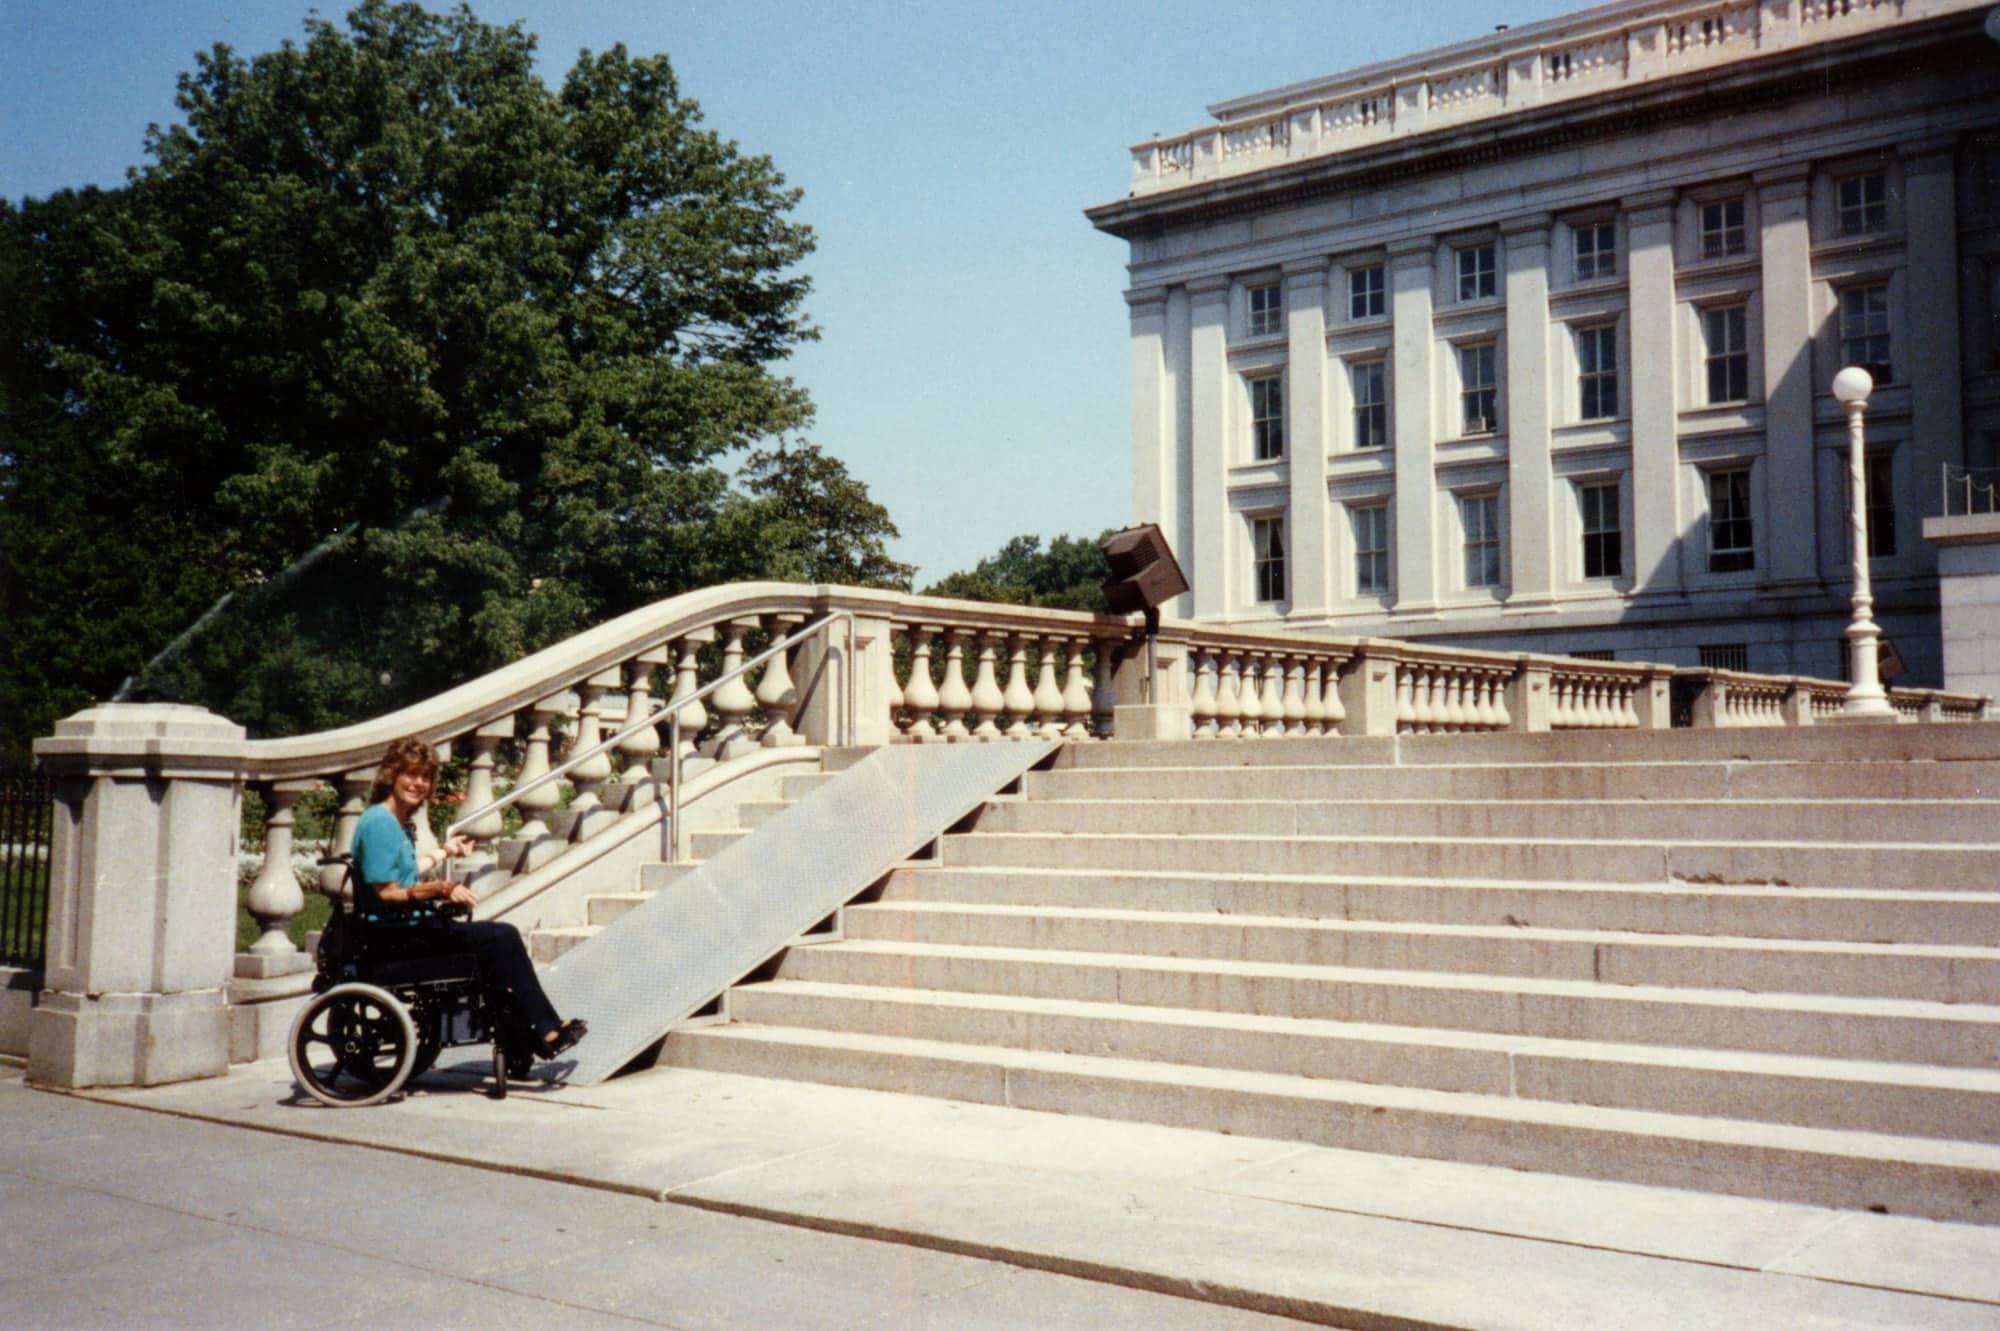 Joni seated in her wheelchair at the bottom of a set of stairs in front of a large historical building, a recently installed ramp in front of her.